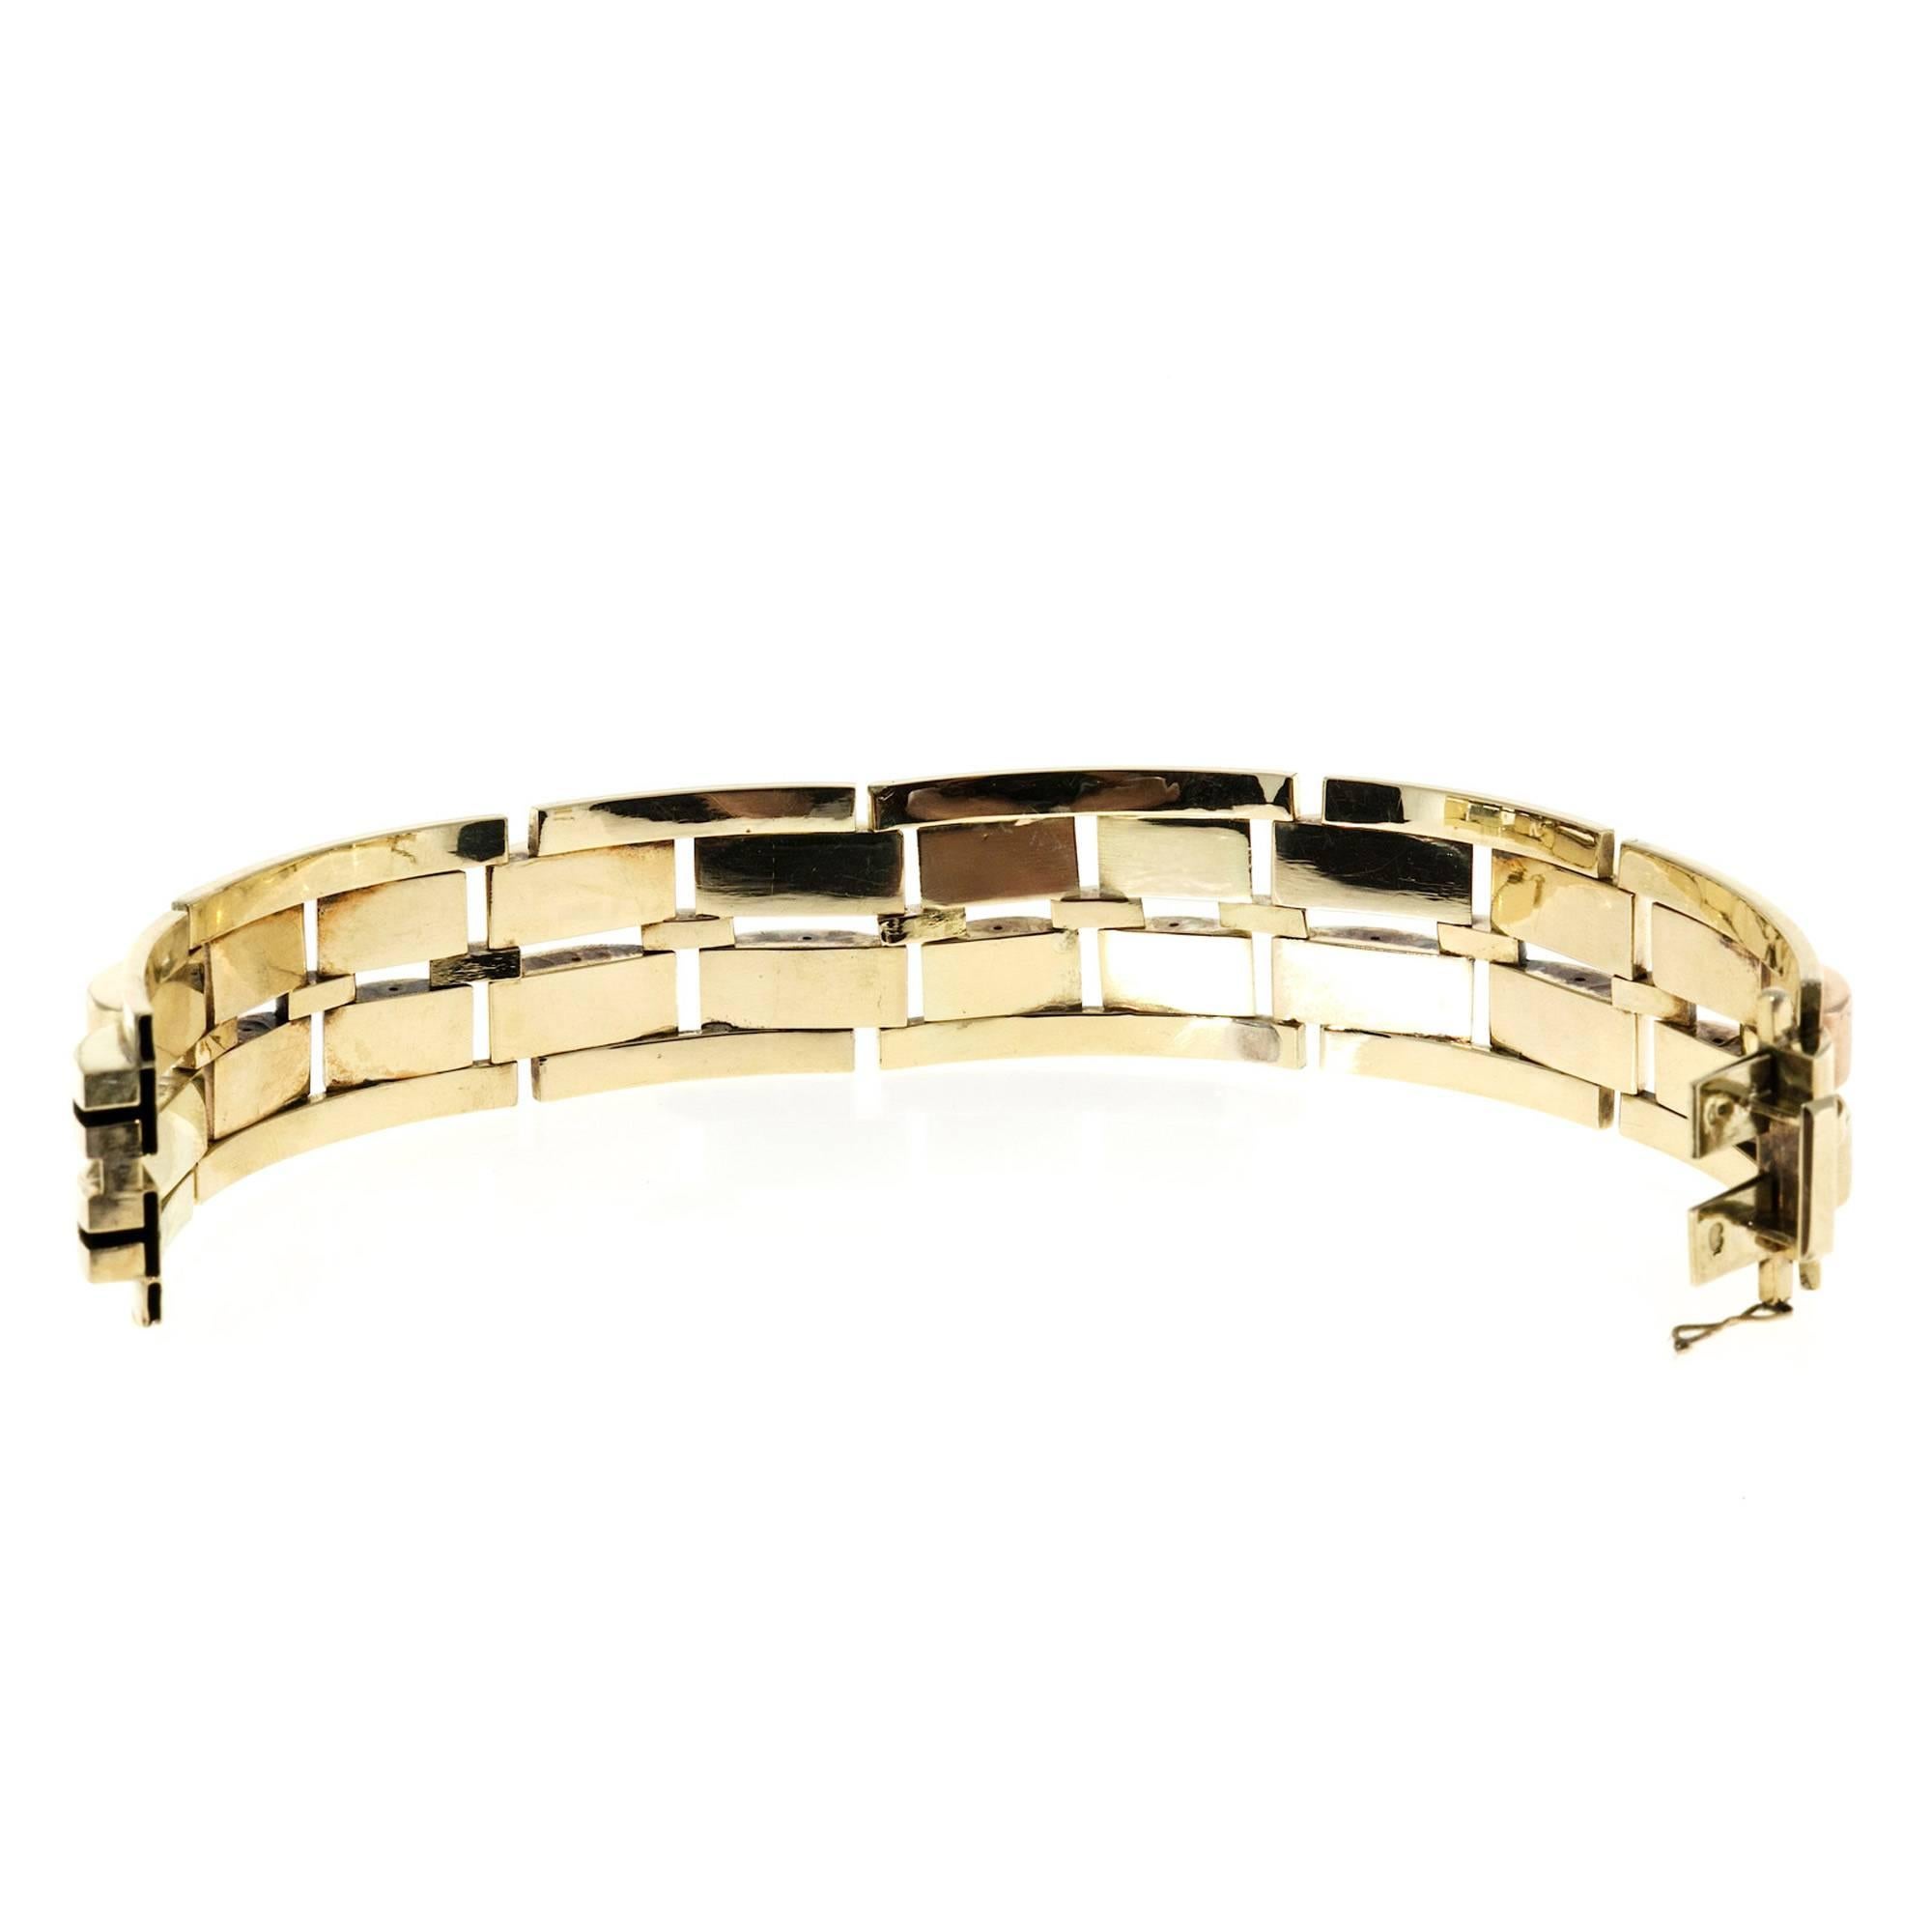 Retro Art Deco rose and green gold 1940-1950 bracelet.  

14k Rosw and green gold
Tested: 14k
41.0 grams
Bracelet length: 7.5 inches
Width: 23.97mm
Depth: 5.65mm
